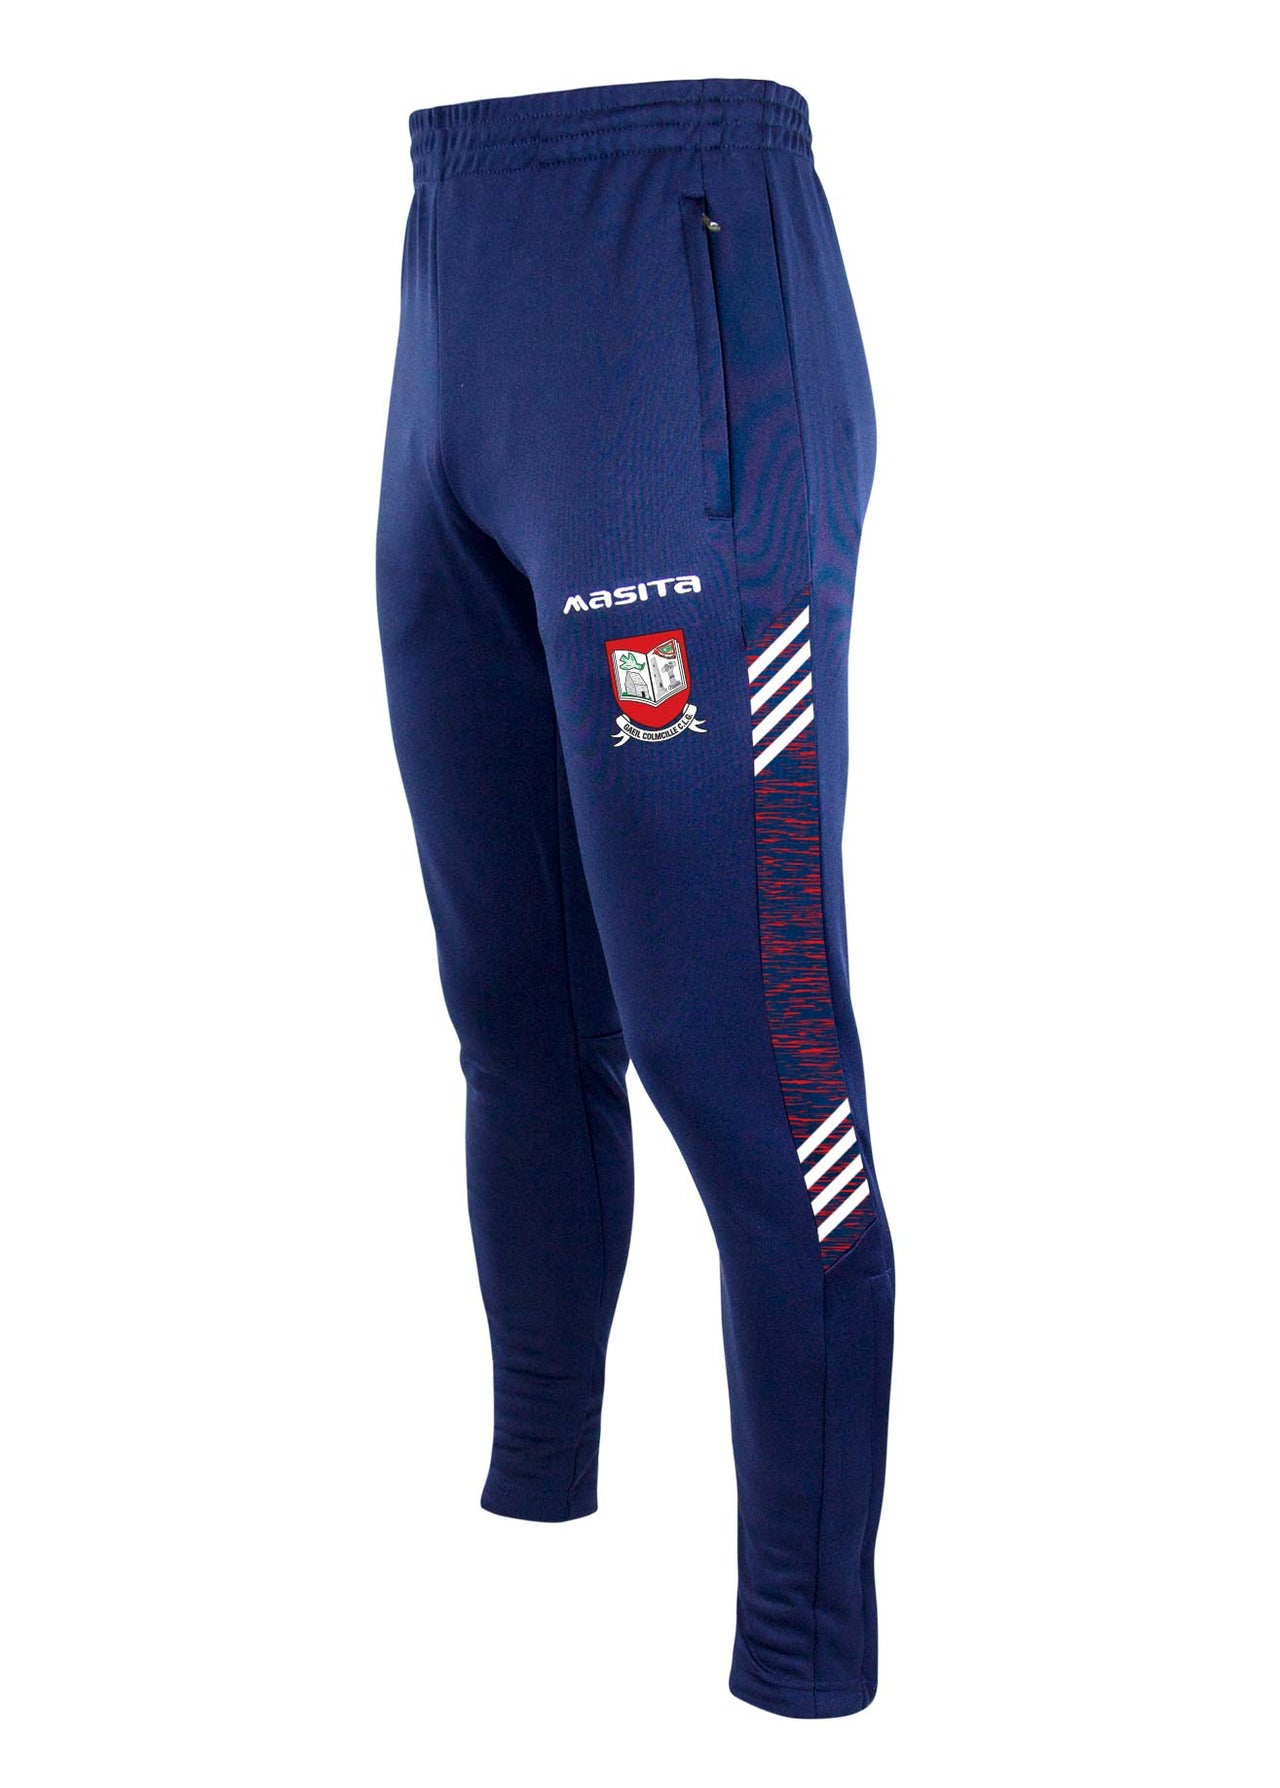 Gaeil Colmcille CLG Skinny Bottoms Adults